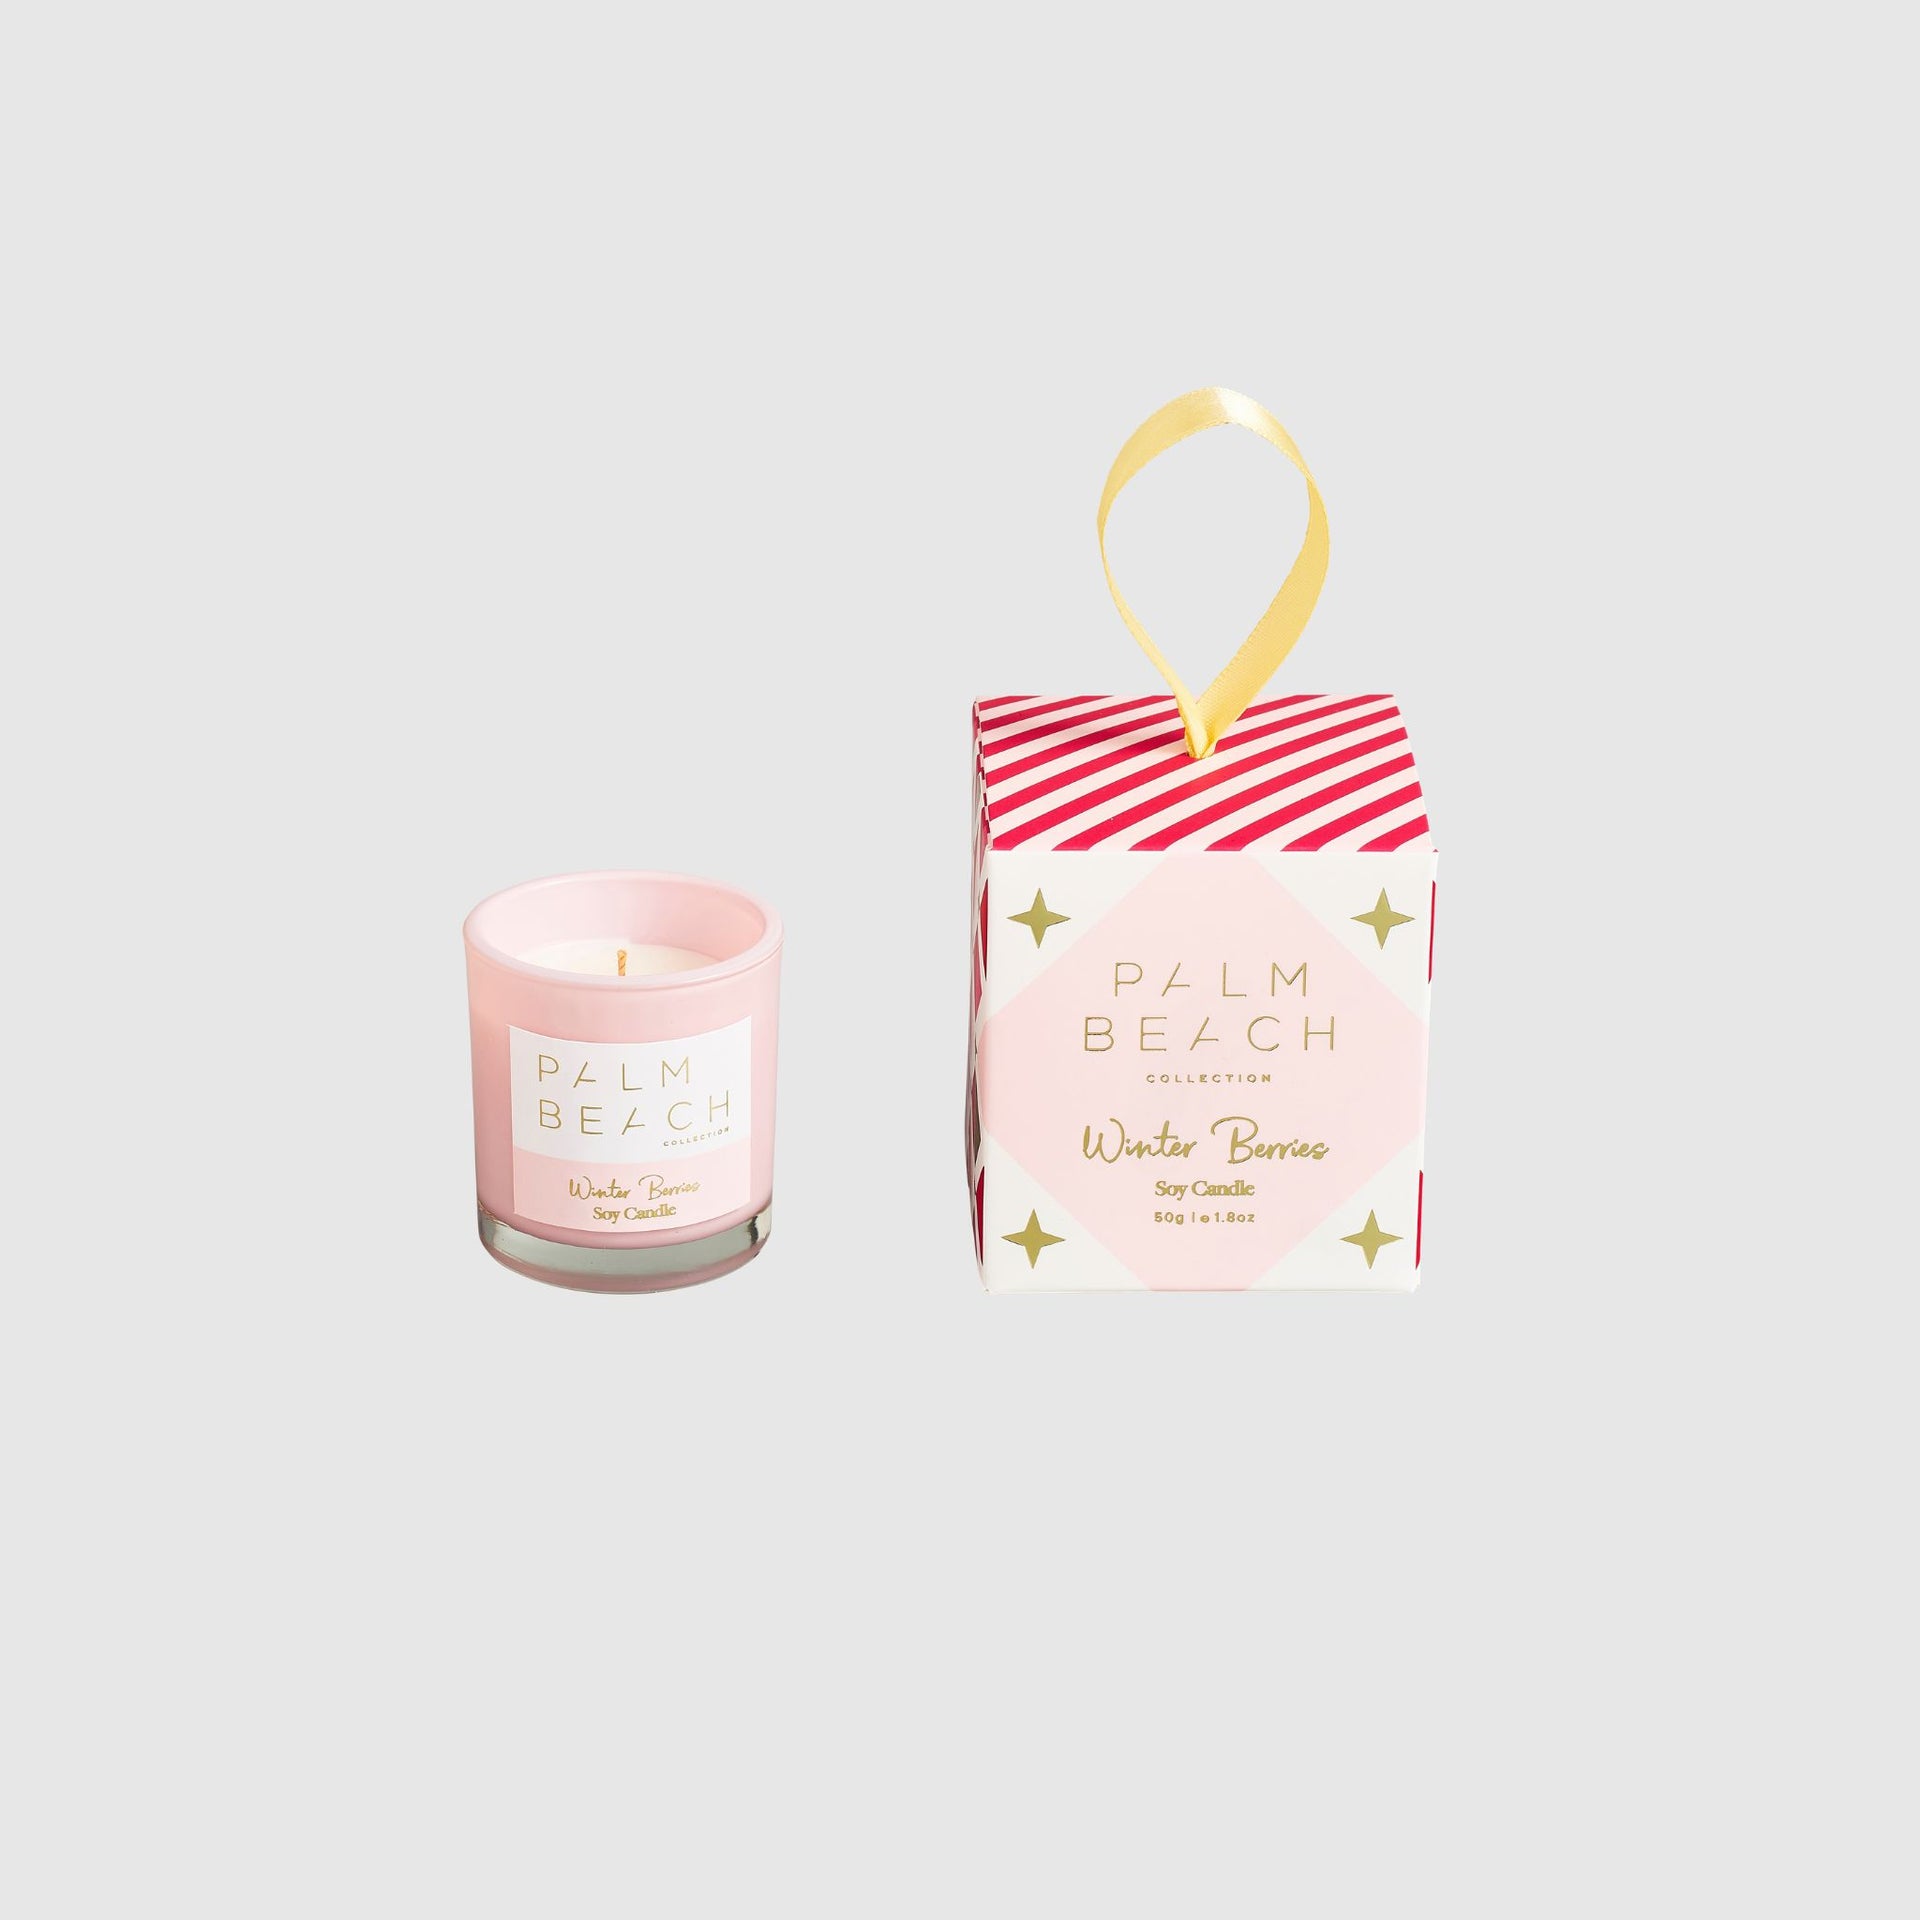 Winter Berries <br> Hanging Bauble <br> 50g Extra Mini Candle